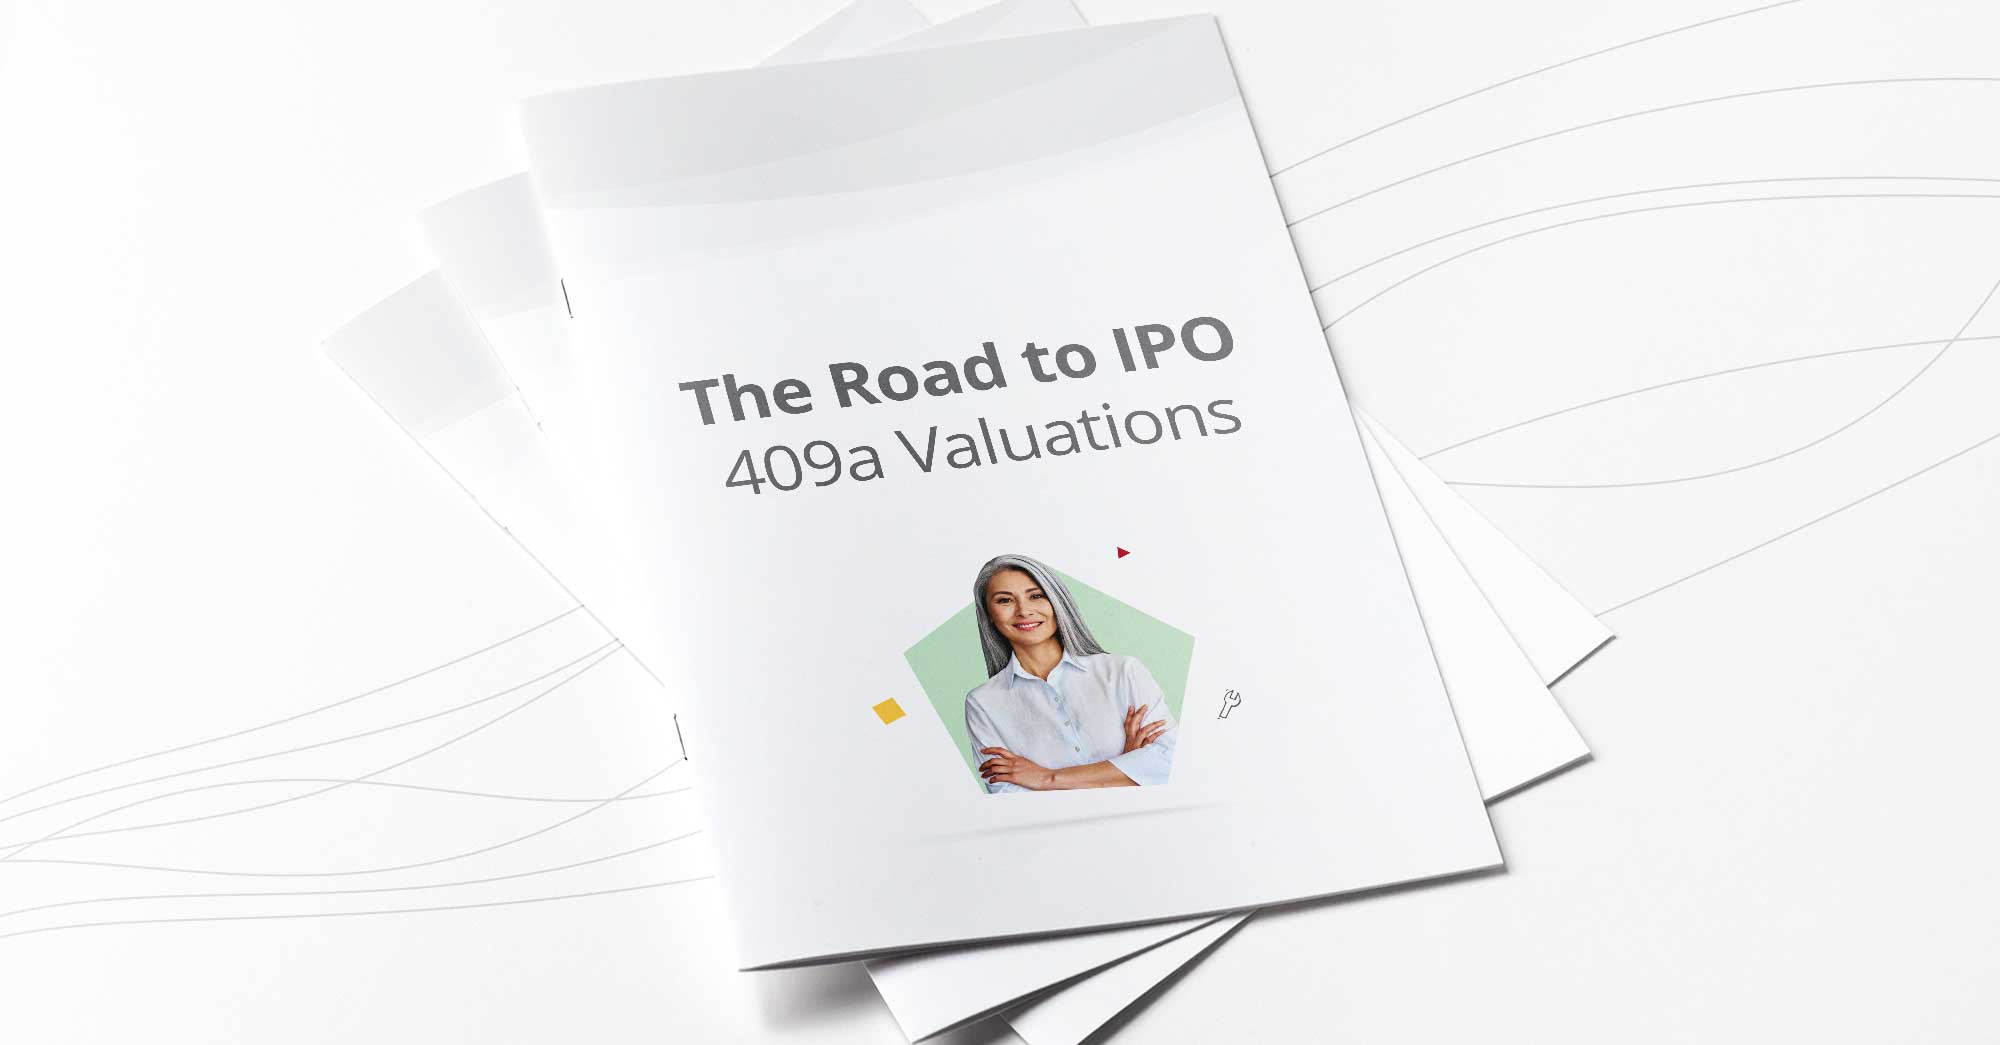 The Road to IPO: 409A Valuations